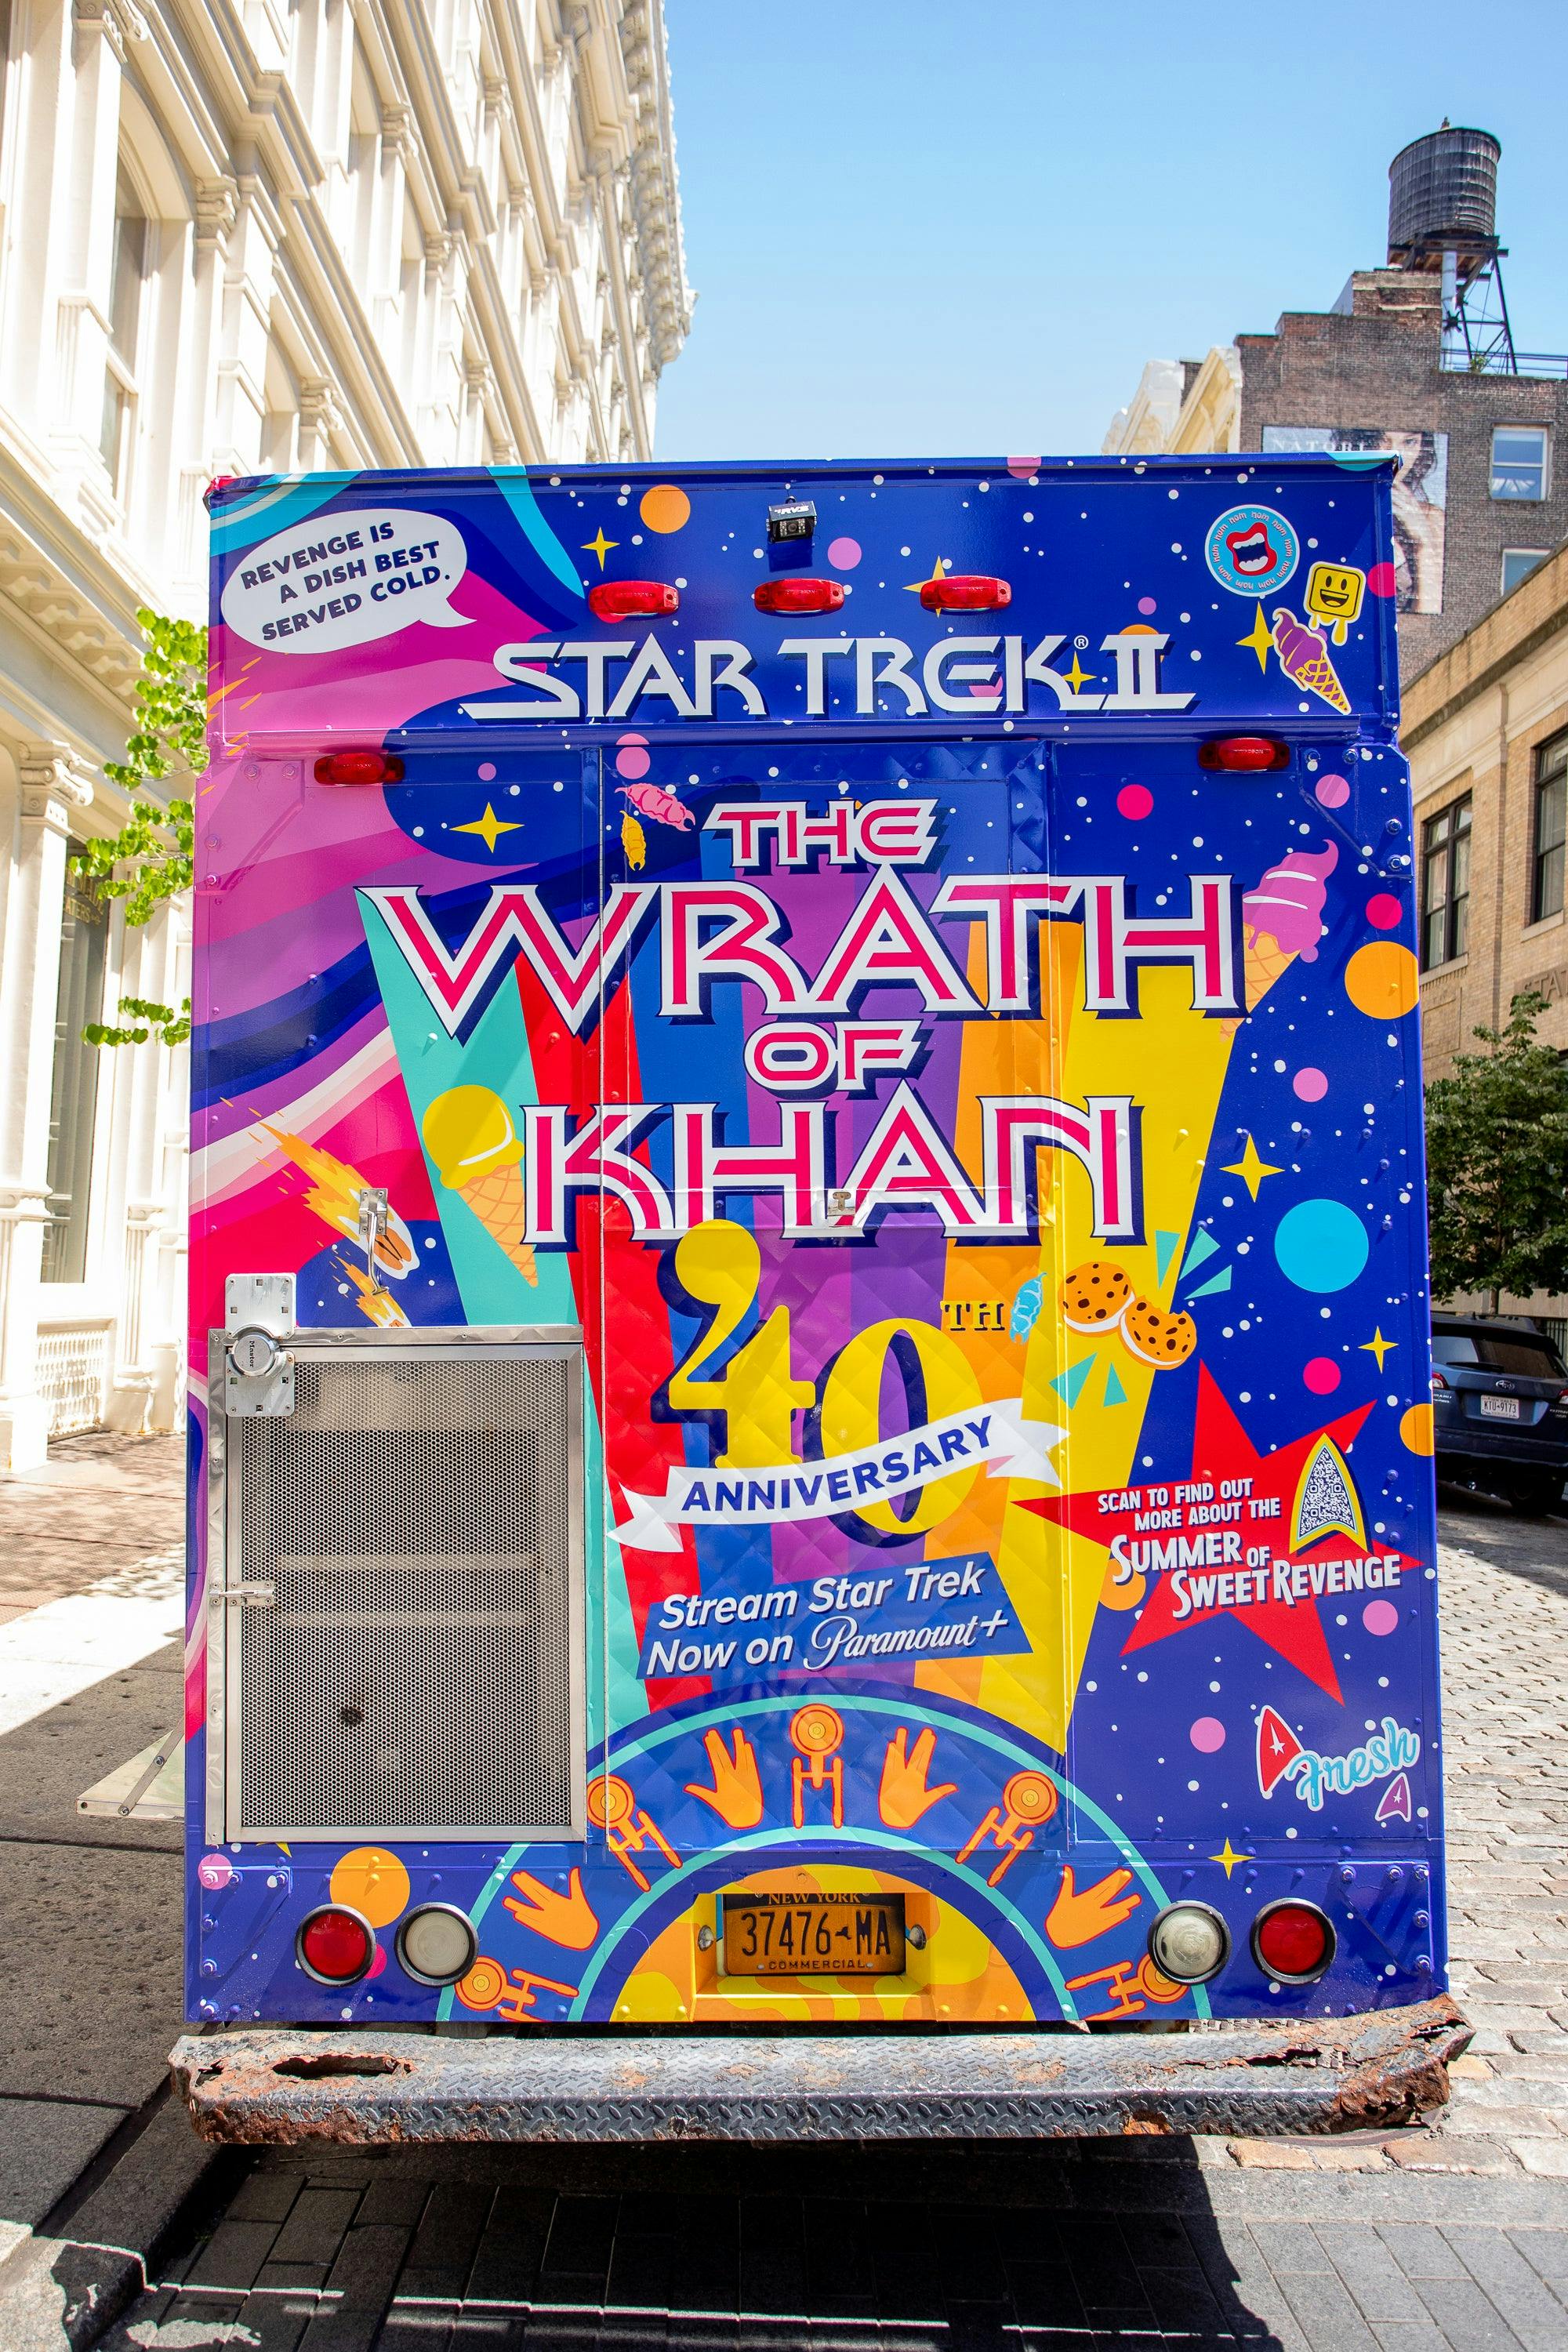 The back of the truck, which features "Star Trek II: The Wrath of Khan" in the film's title font.